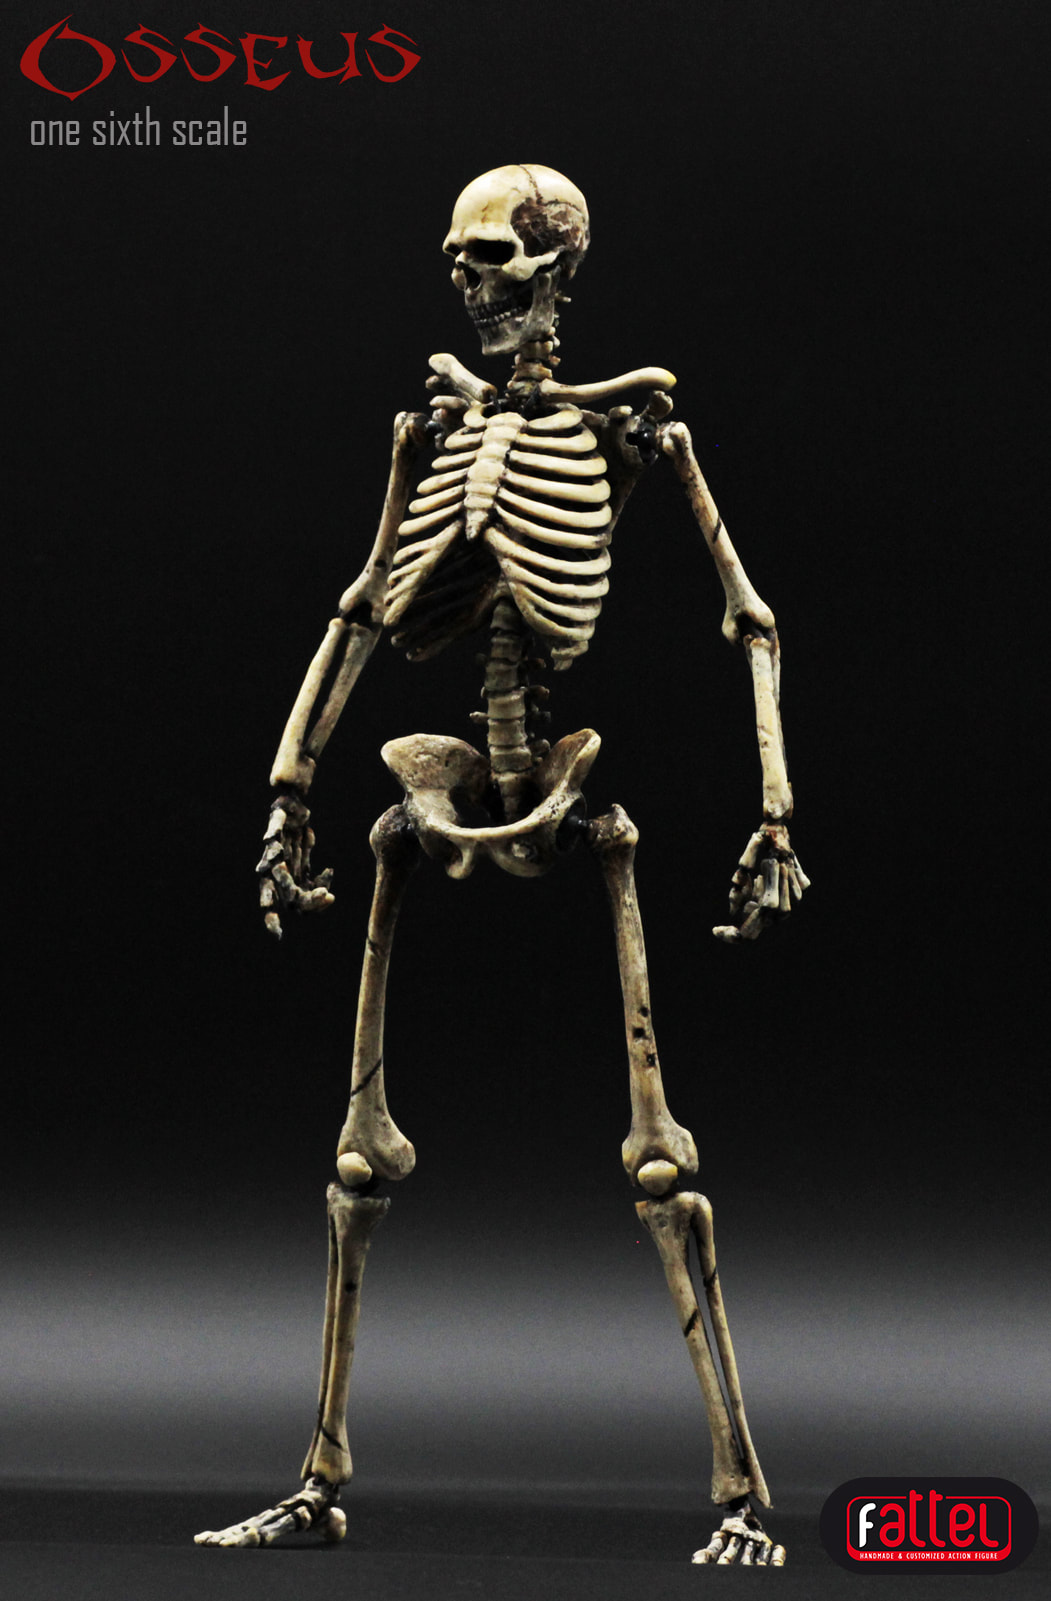 action figure skeleton 1/6 by fattel - fattel -hand made & customized action  figures- Original figures of 30 cm in 16 scale of the human skeleton, with  over 70 points of articulation